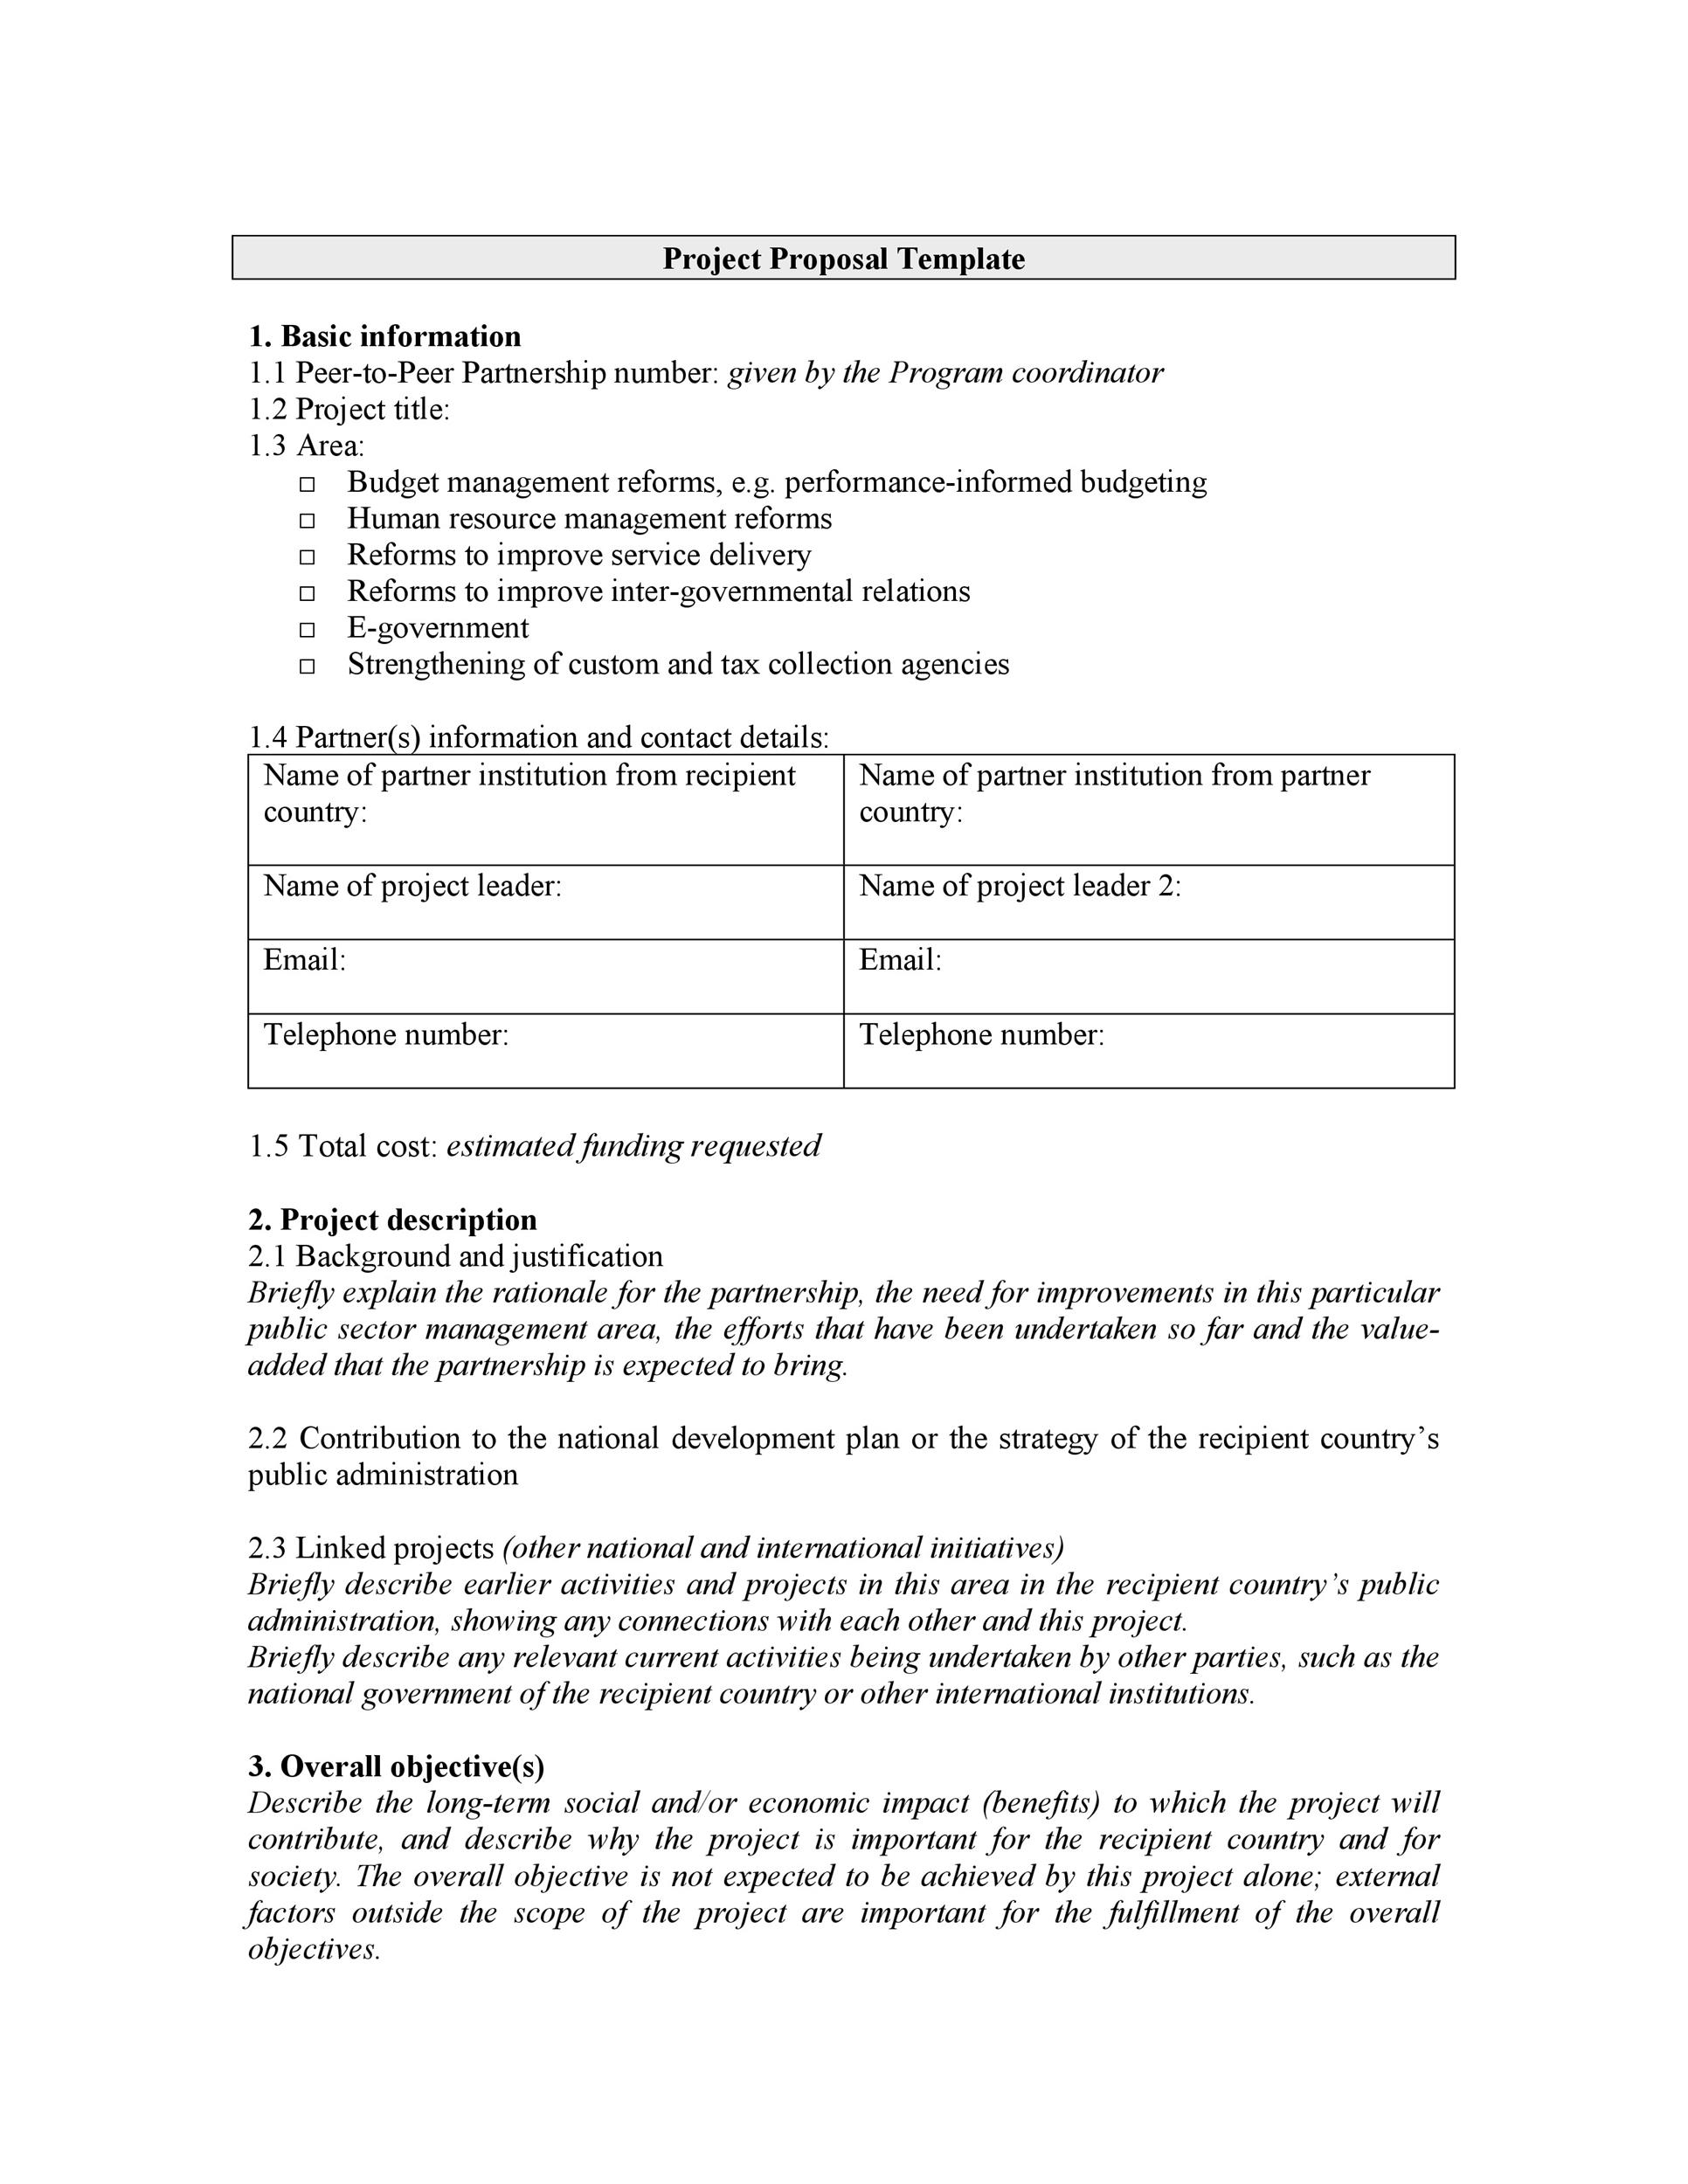 consulting-proposal-template-for-professionals-providing-general